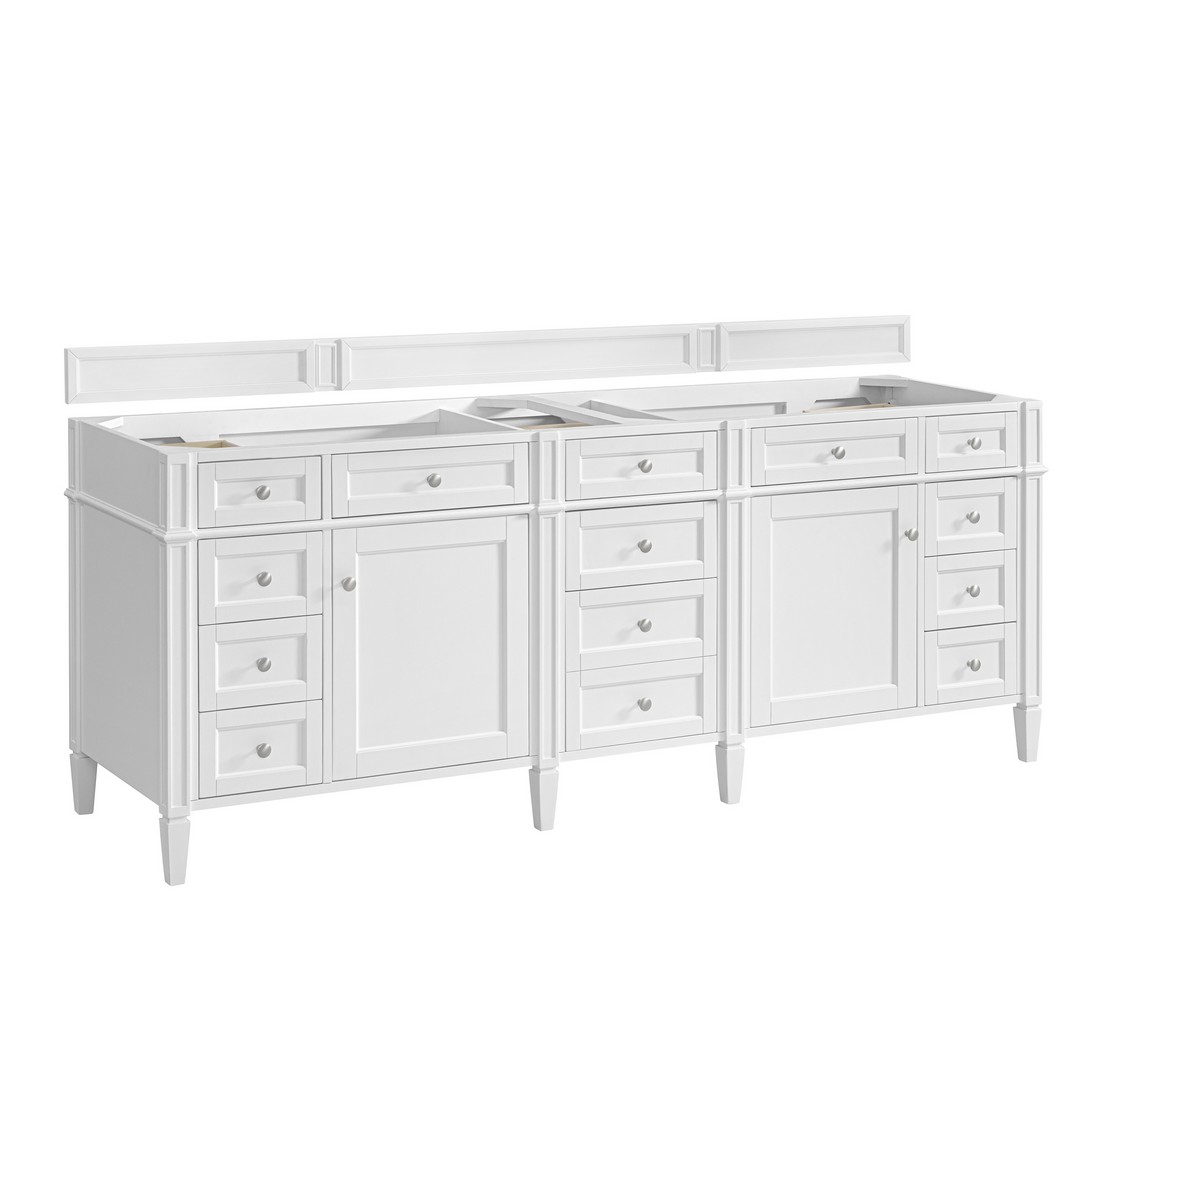 JAMES MARTIN 655-V84-BW BRITTANY 83 5/8 INCH FREE-STANDING DOUBLE SINK BATHROOM VANITY CABINET ONLY IN BRIGHT WHITE